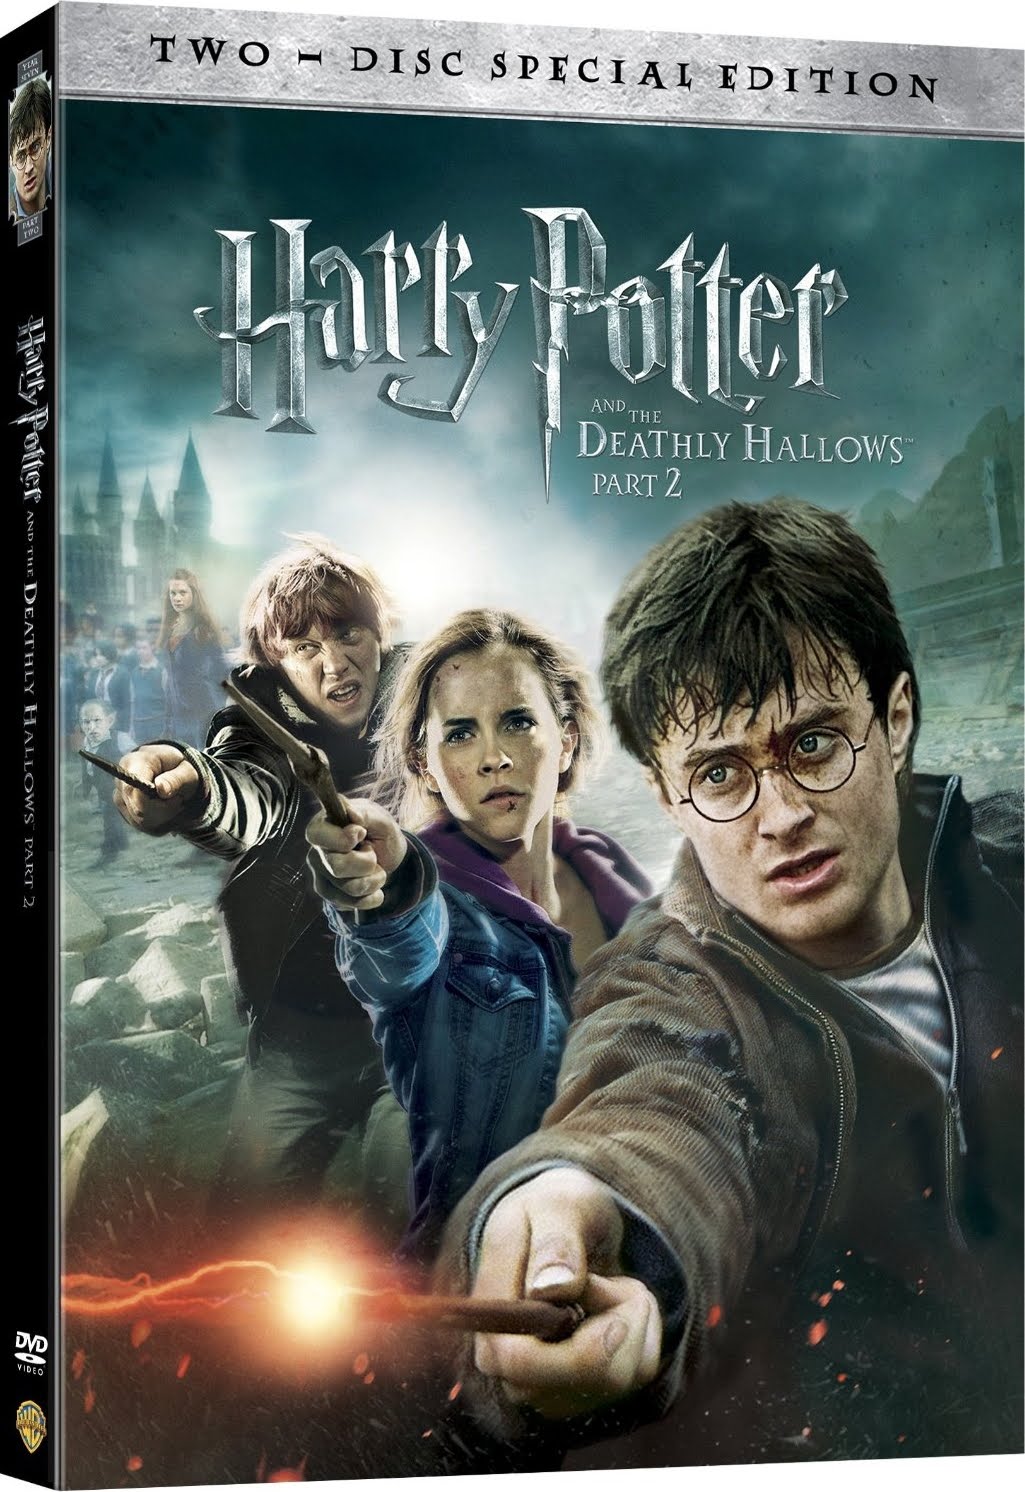 Harry Potter Part 4 In Hindi Download From Worldfree4u